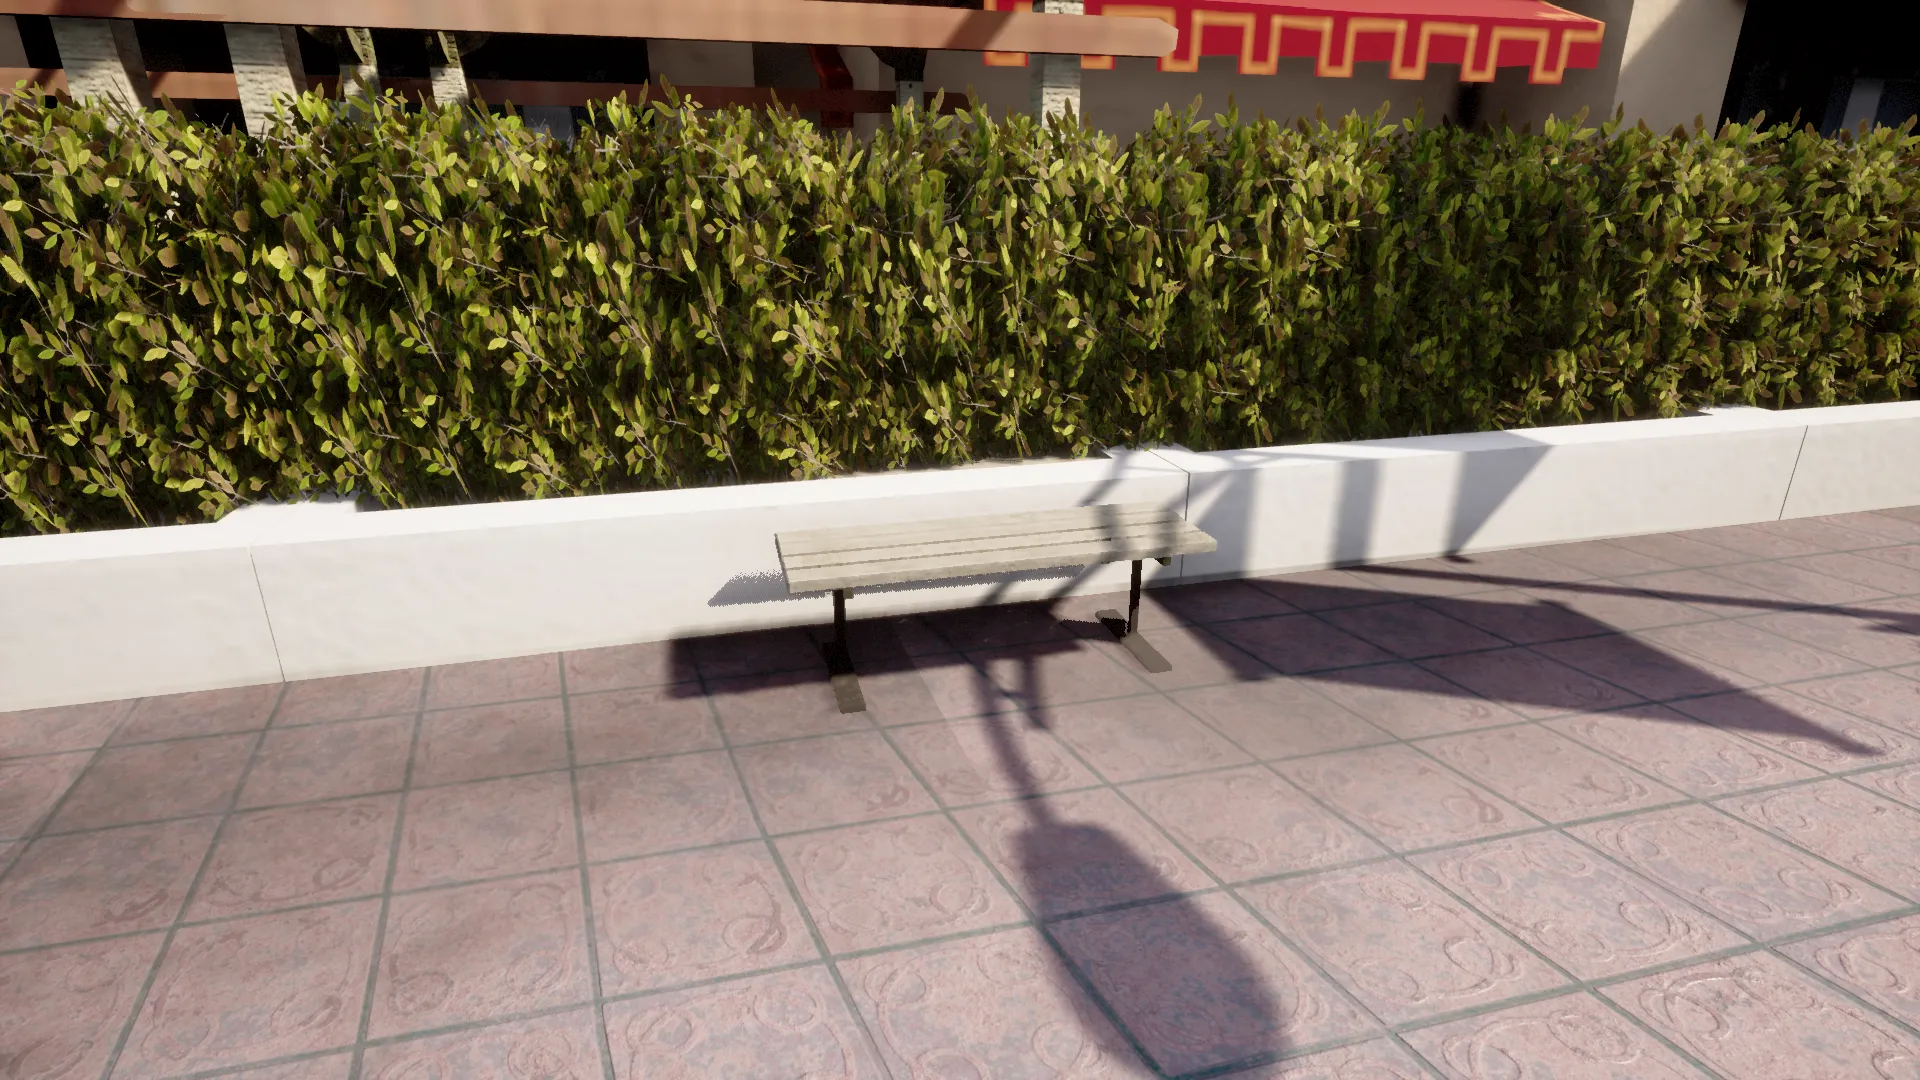 static_prop_bench02